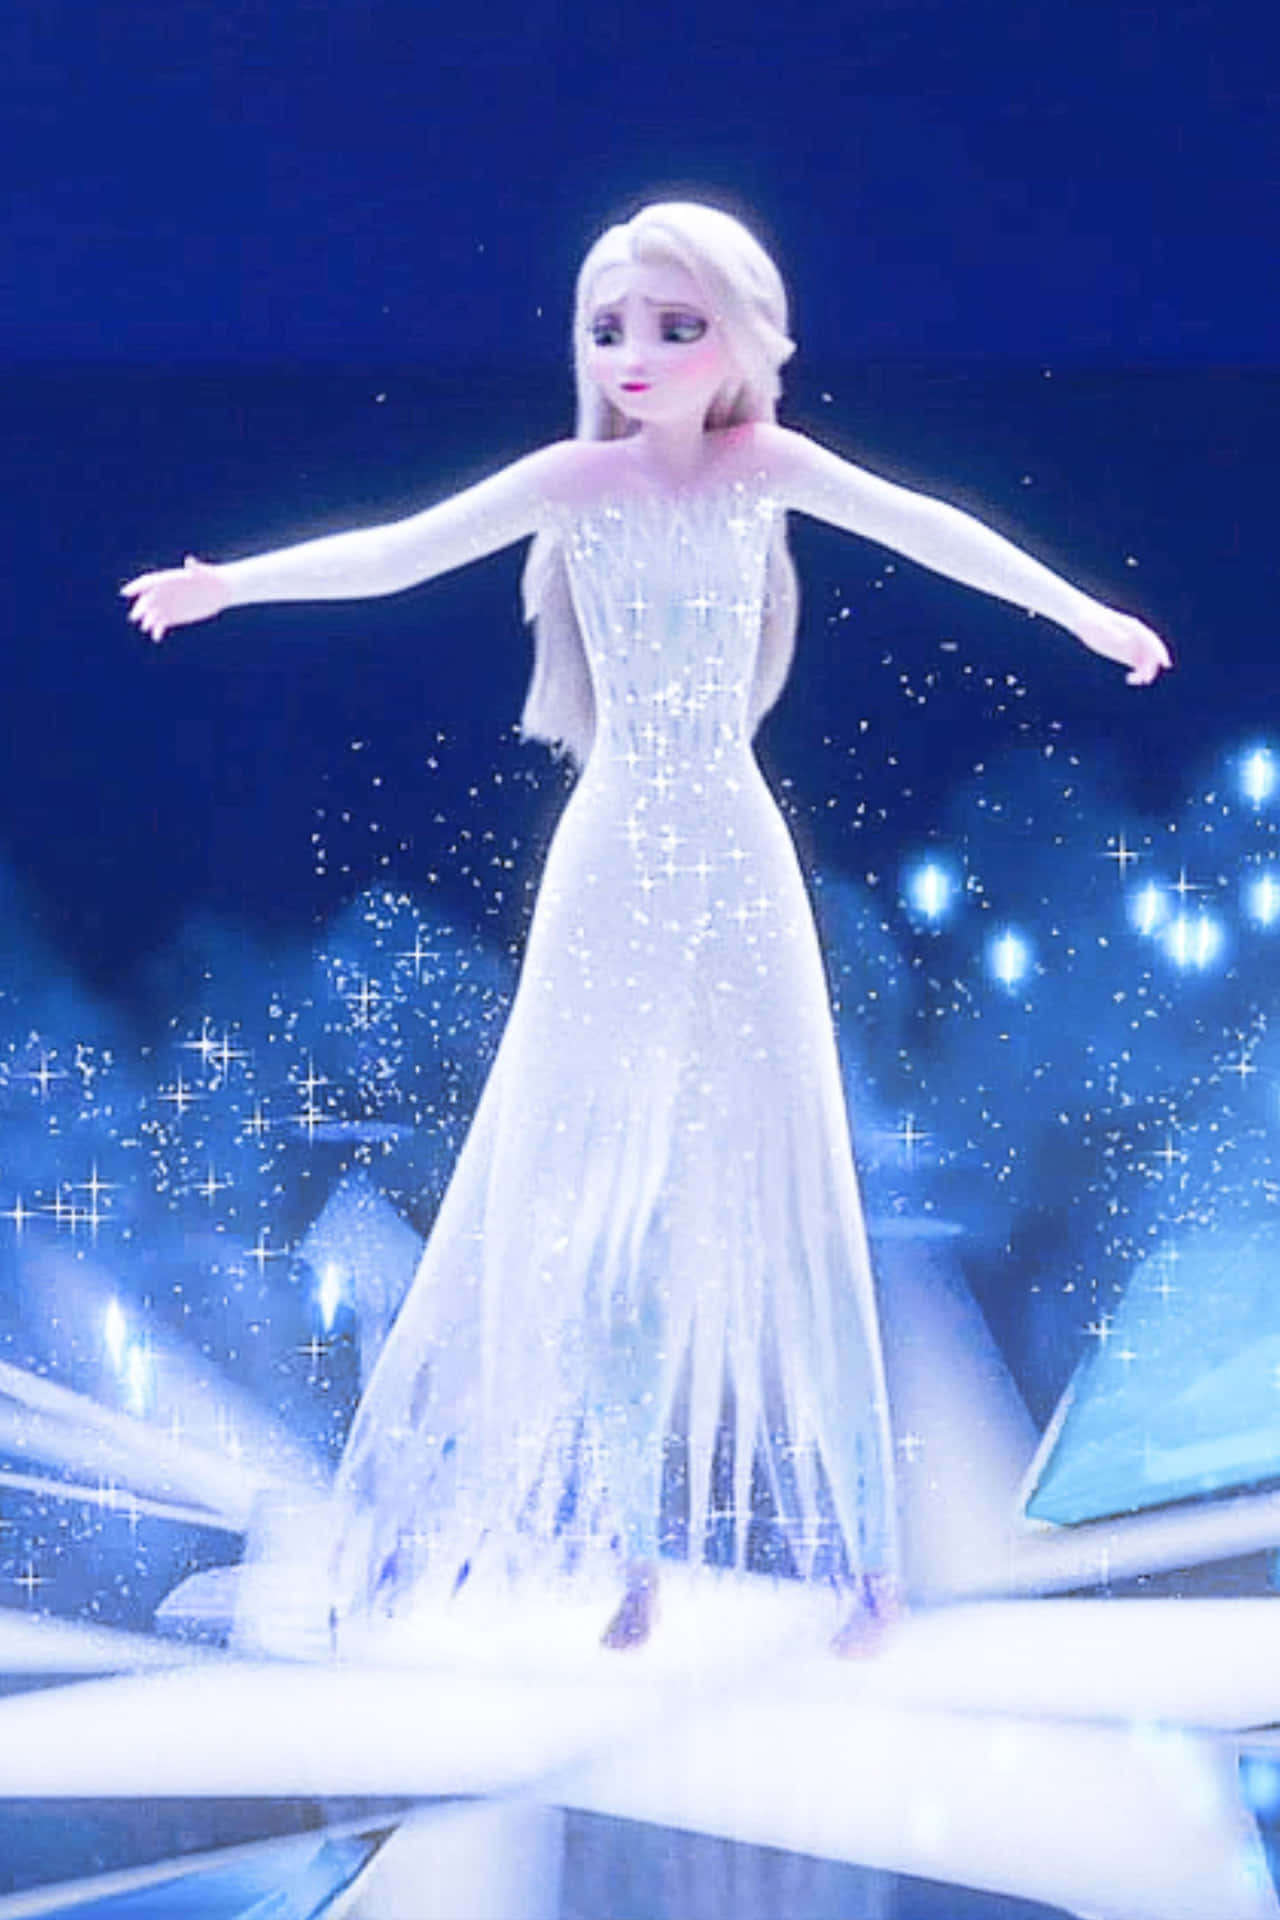 Get ready to experience the magic of 'Frozen 2' with Elsa in her beautiful white dress. Wallpaper